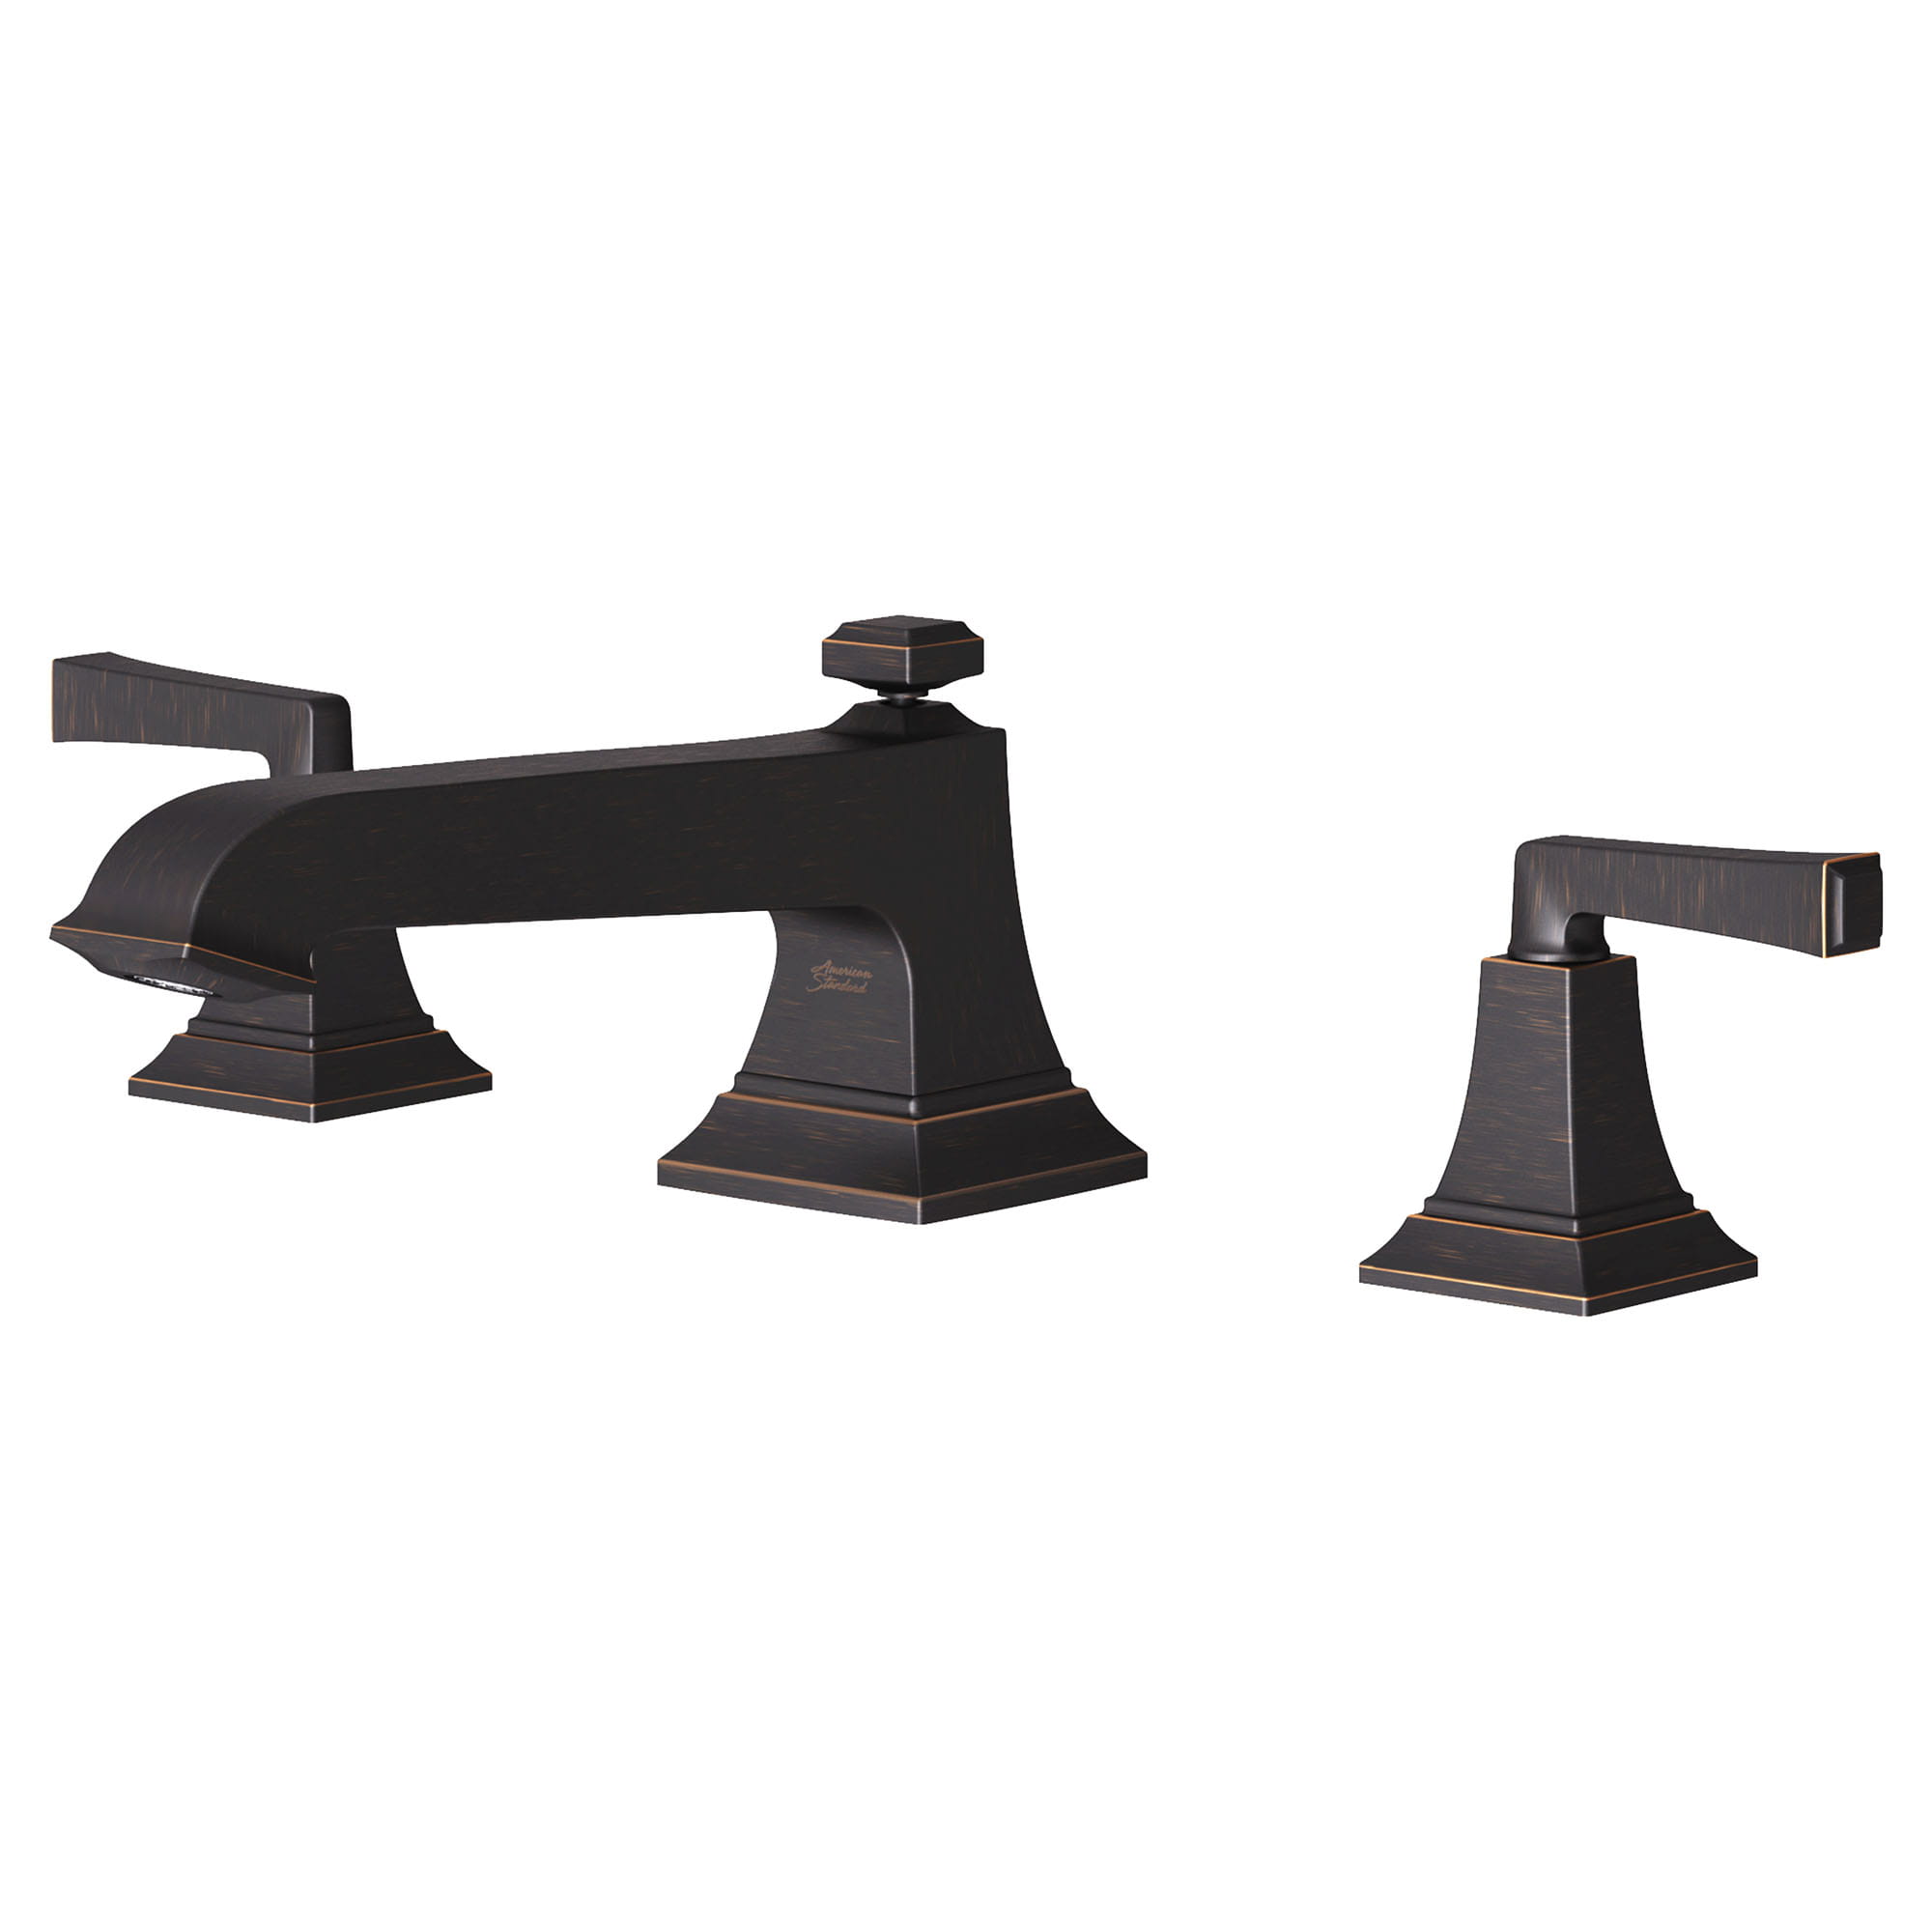 Town Square® S Bathub Faucet With Lever Handles for Flash® Rough-In Valve